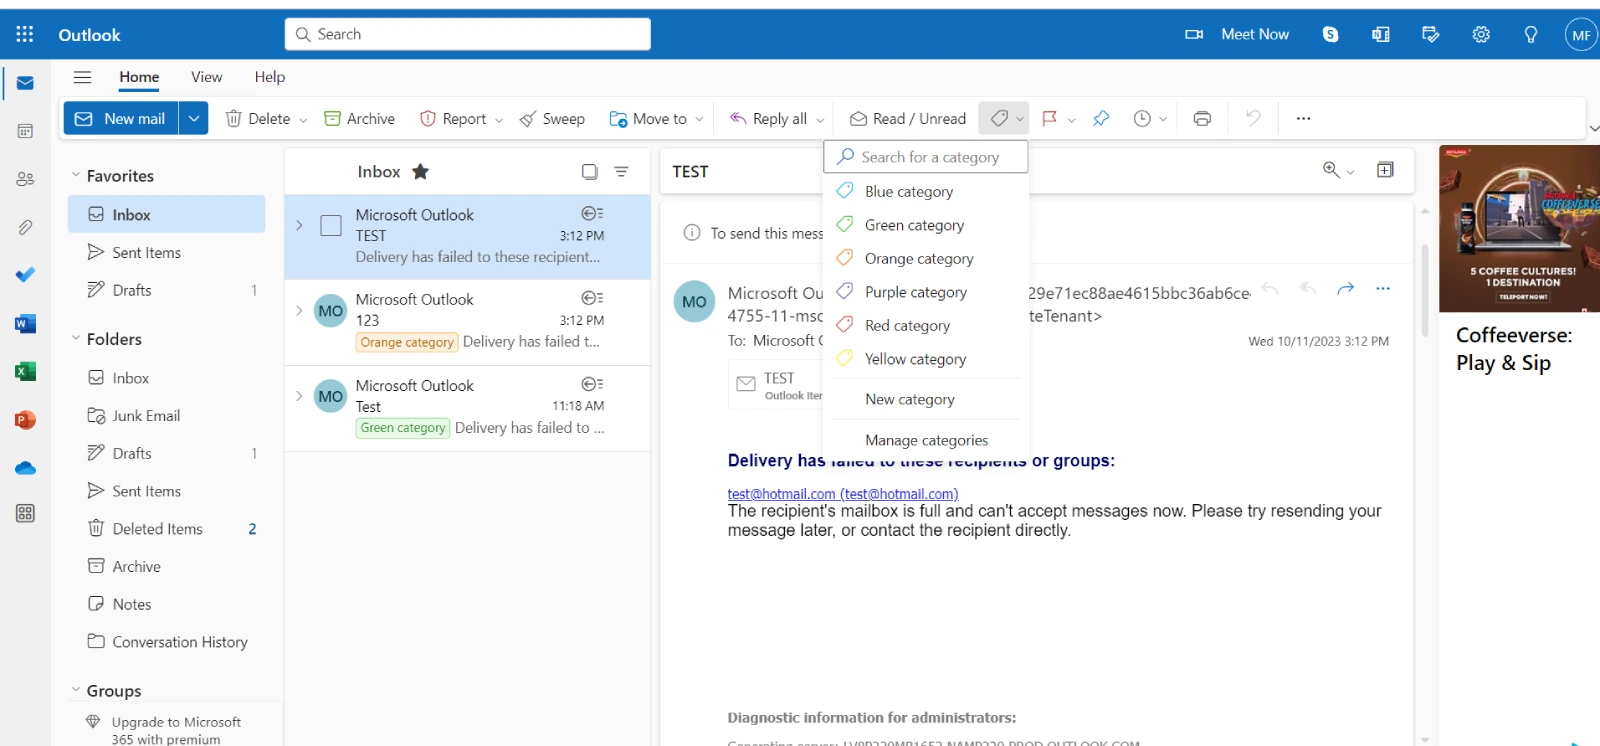 Outlook Home tab, easily navigate through the Tags section and click on Categorize 